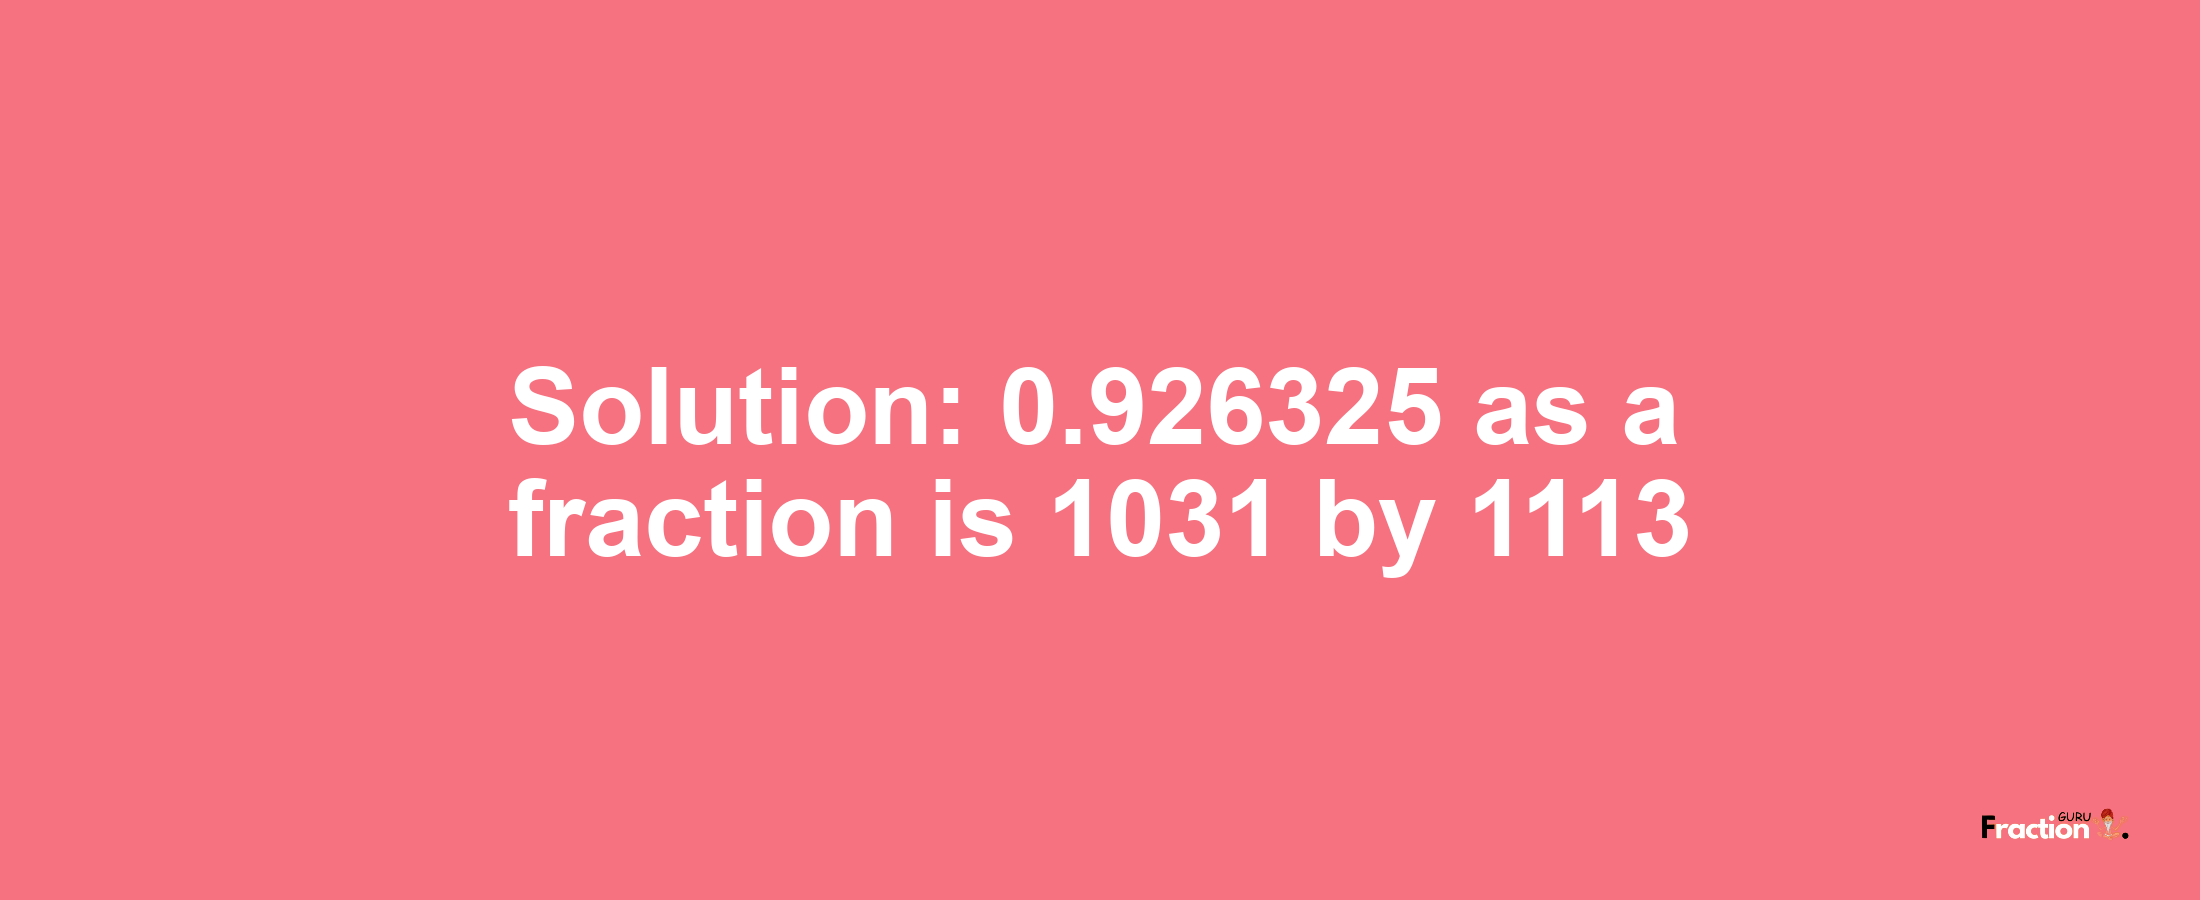 Solution:0.926325 as a fraction is 1031/1113